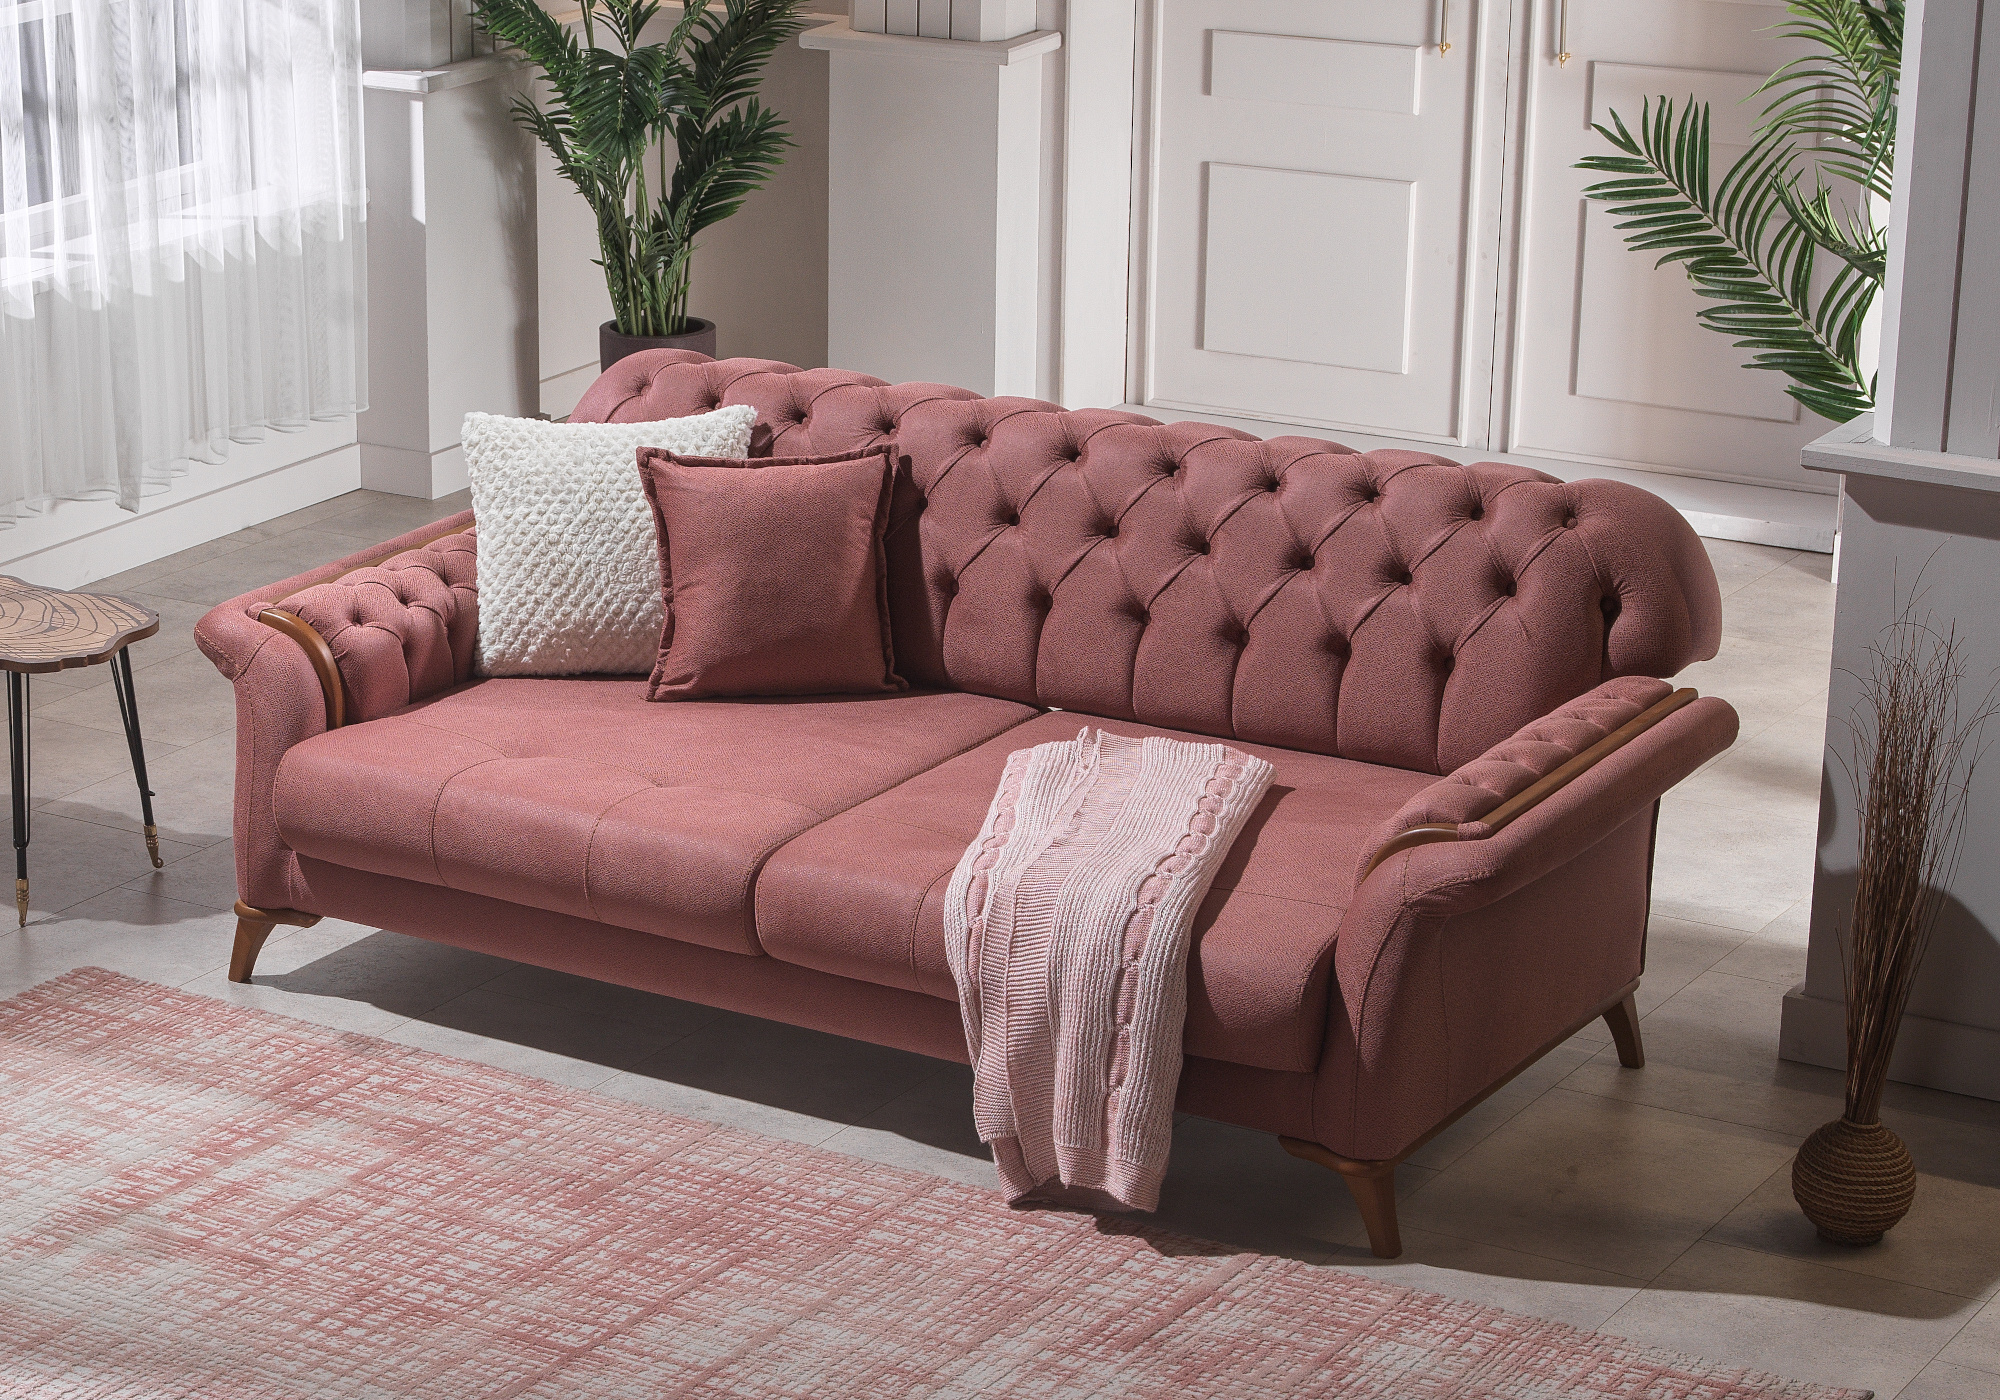 Canapé chesterfield rose PANAMA.5